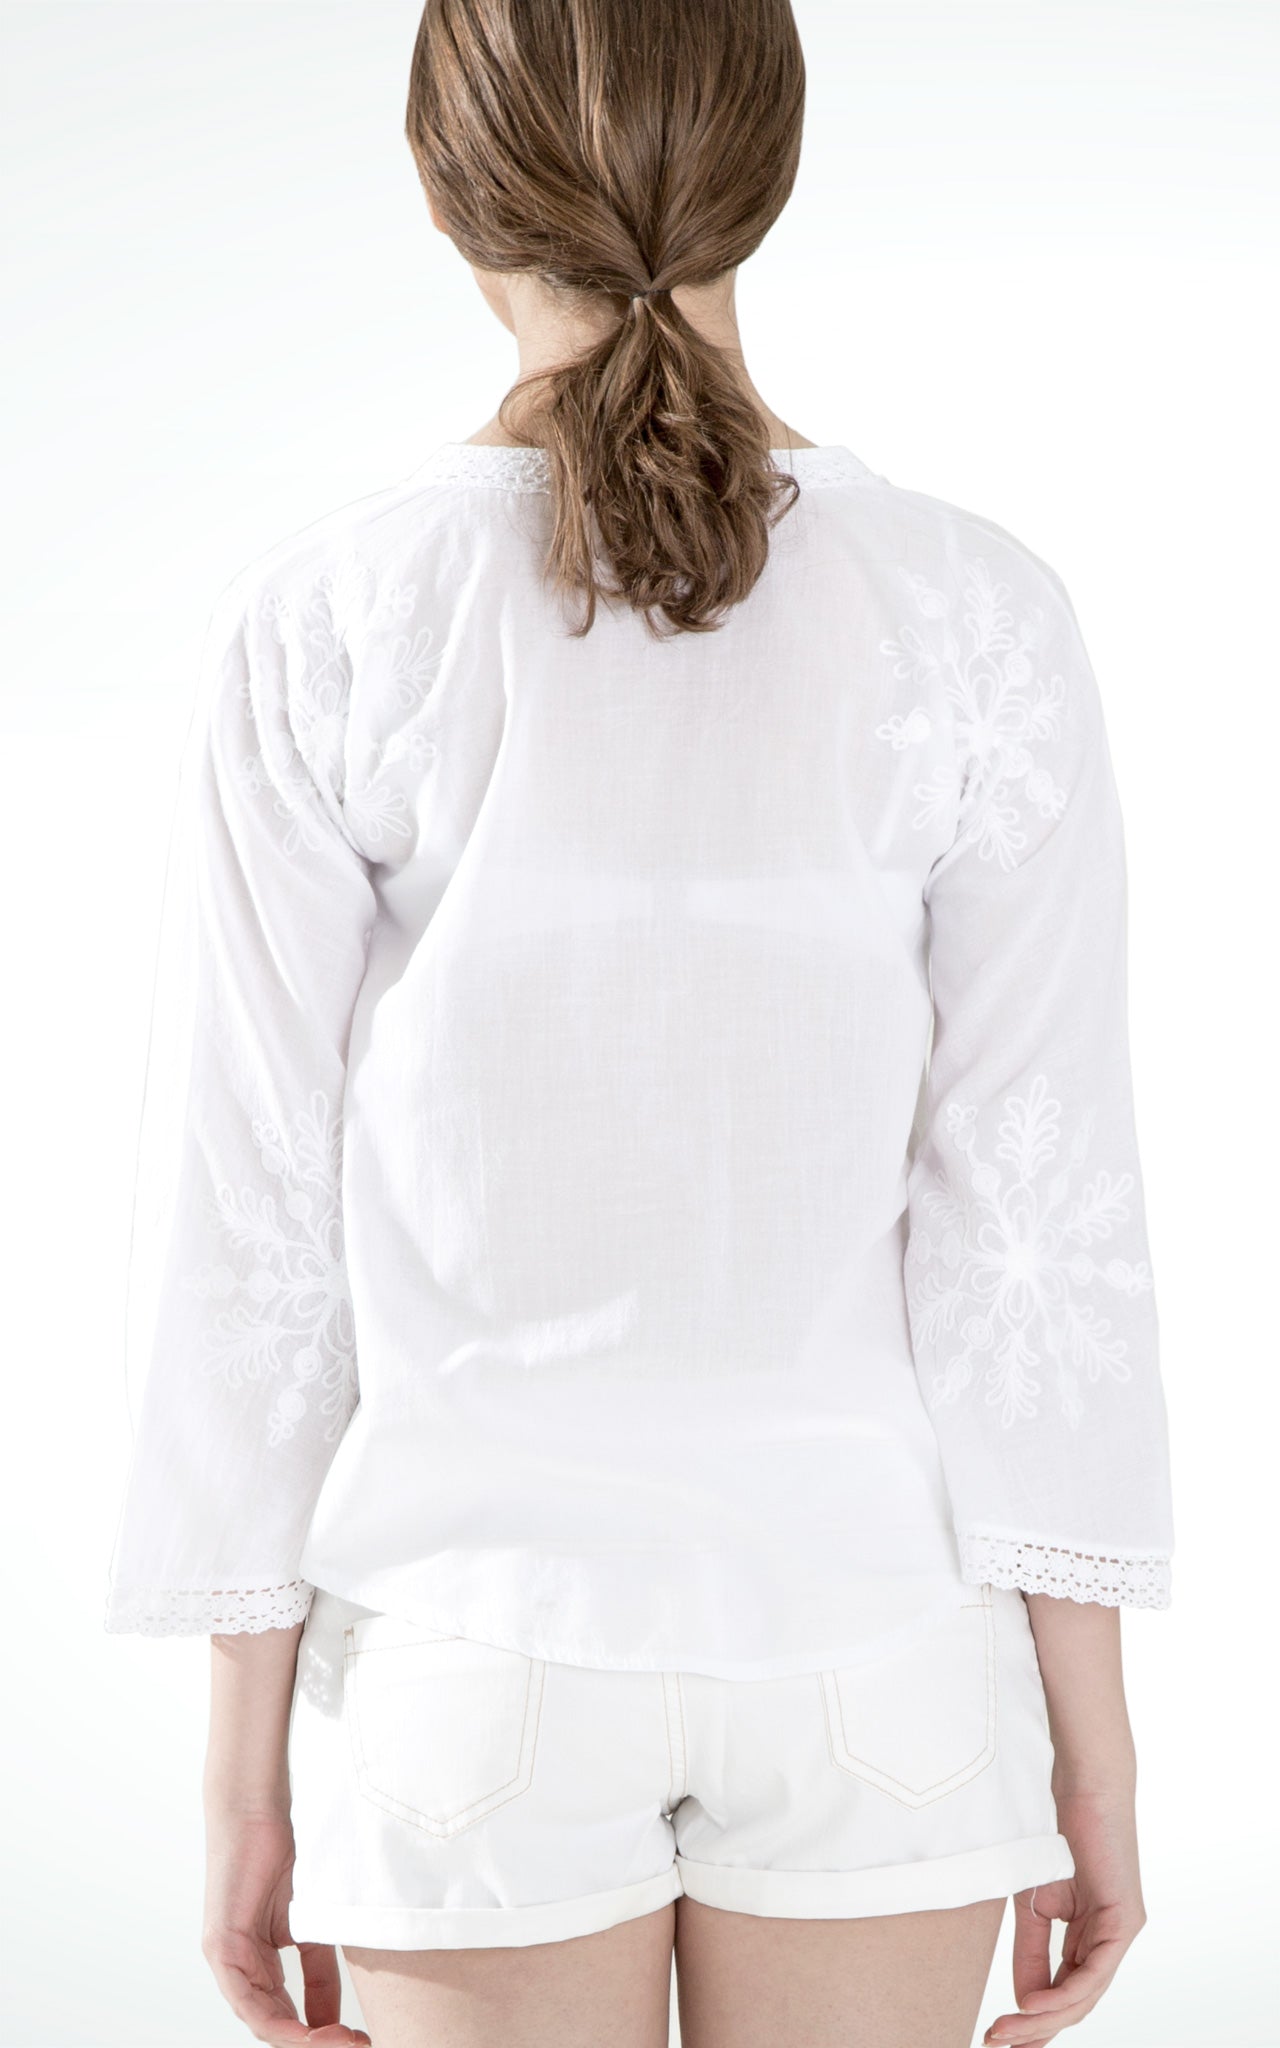 Women's Embroidered Long Sleeves White Cotton Top